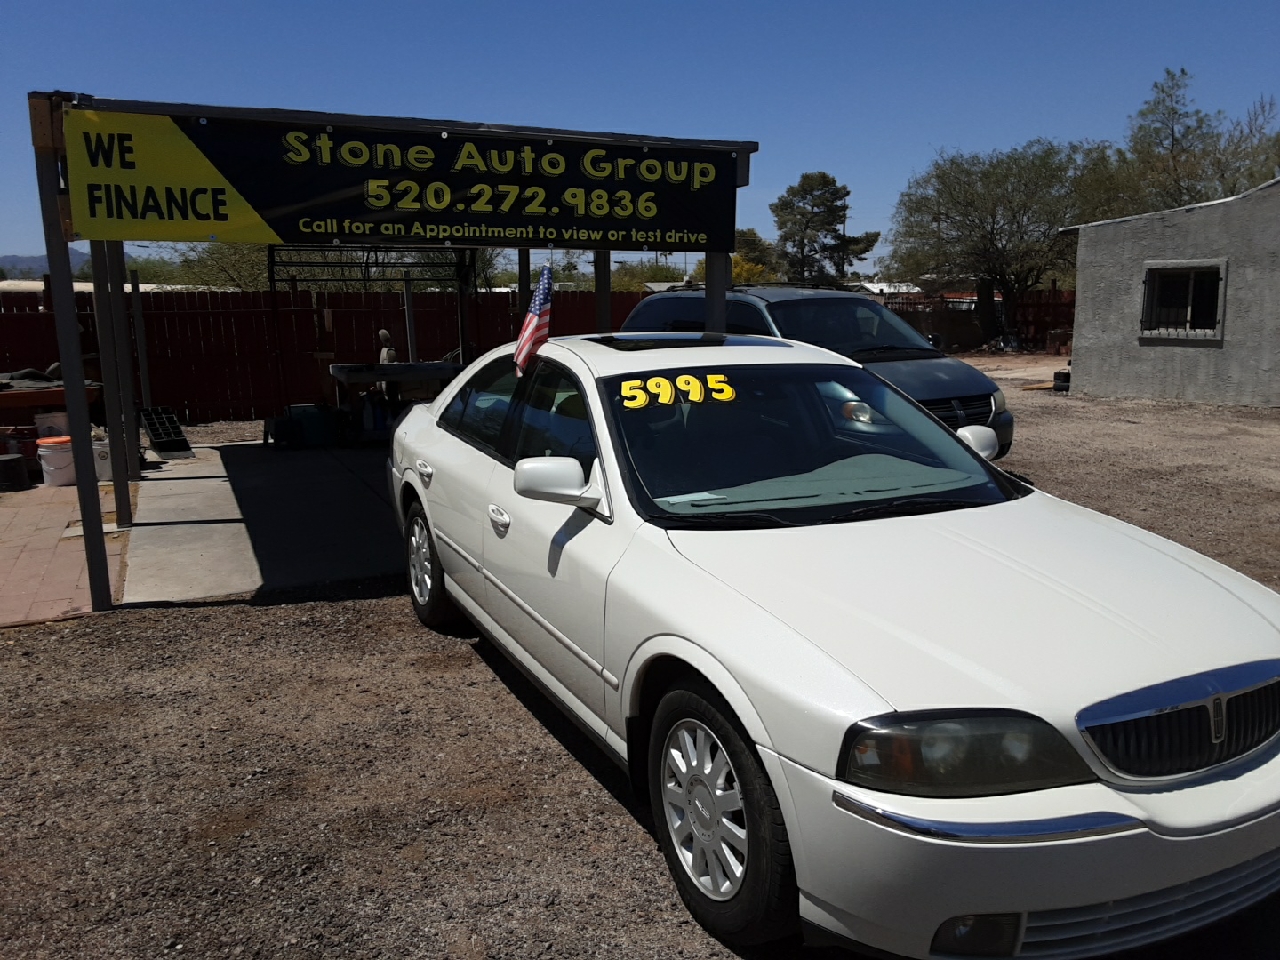 Used 04 Lincoln Ls V6 Luxury For Sale In Tucson Az Stone Auto Group